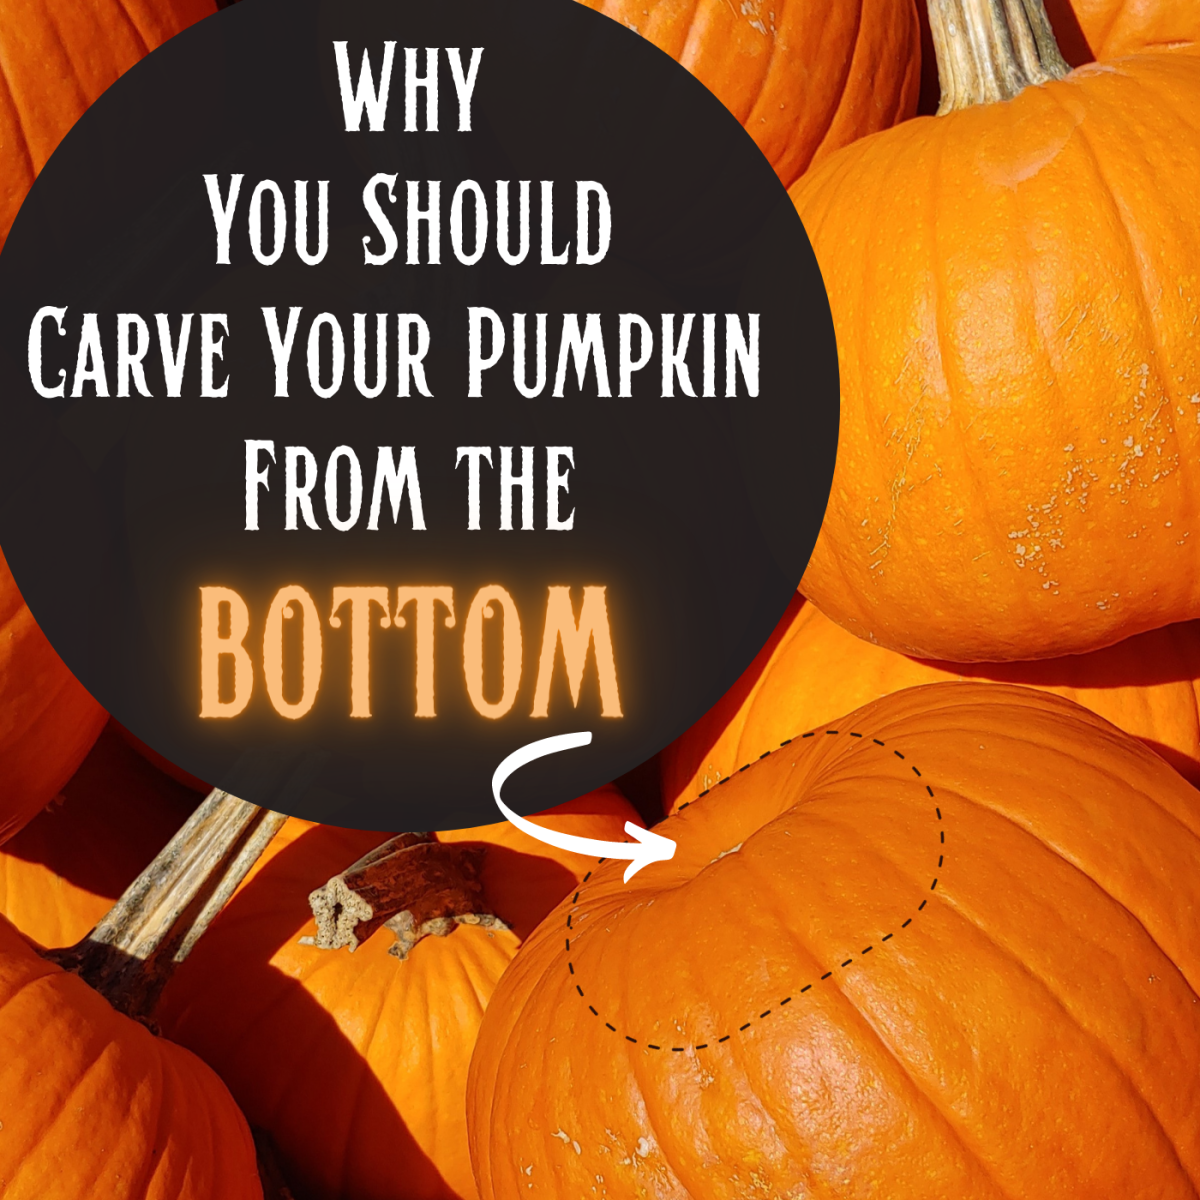 5 Reasons to Cut Your Pumpkin From the Bottom